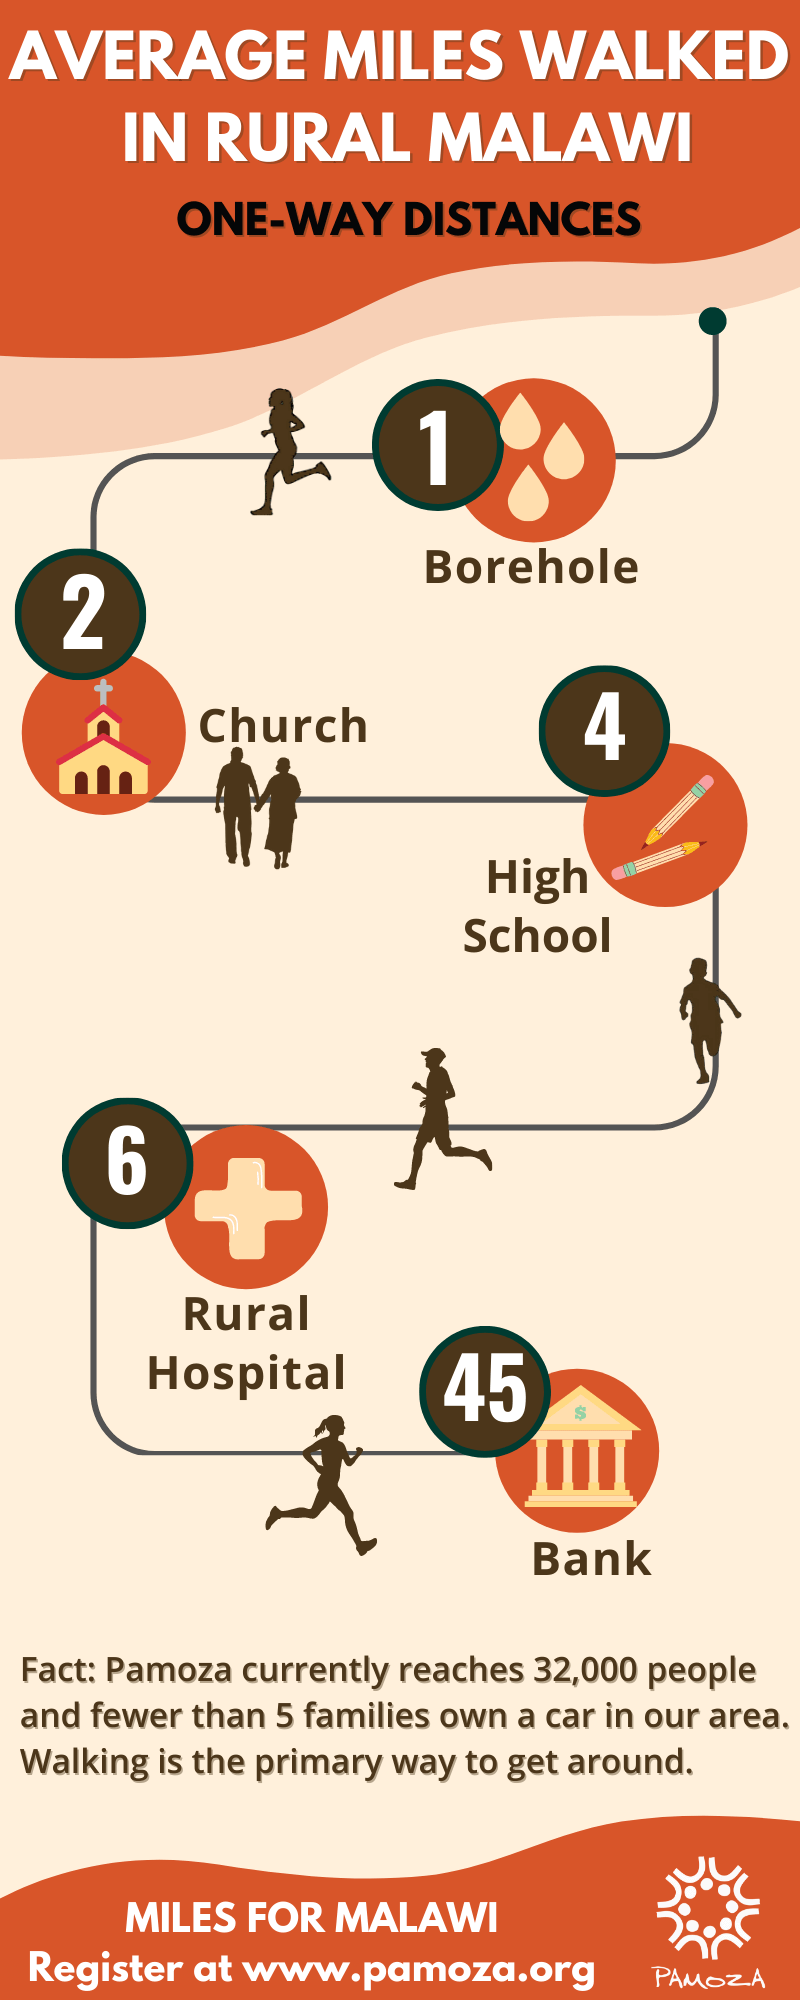 Average Miles Walked in Rural Malawi: One-way Distances. Borehold: 1 mile. Church: 2 miles. High School: 4 miles. Hospital: 6 miles. Bank: 45 miles. Fact: Pamoza currently reaches 32,000 people and fewer than 5 families own a car in our area. Walking is the primary way to get around.